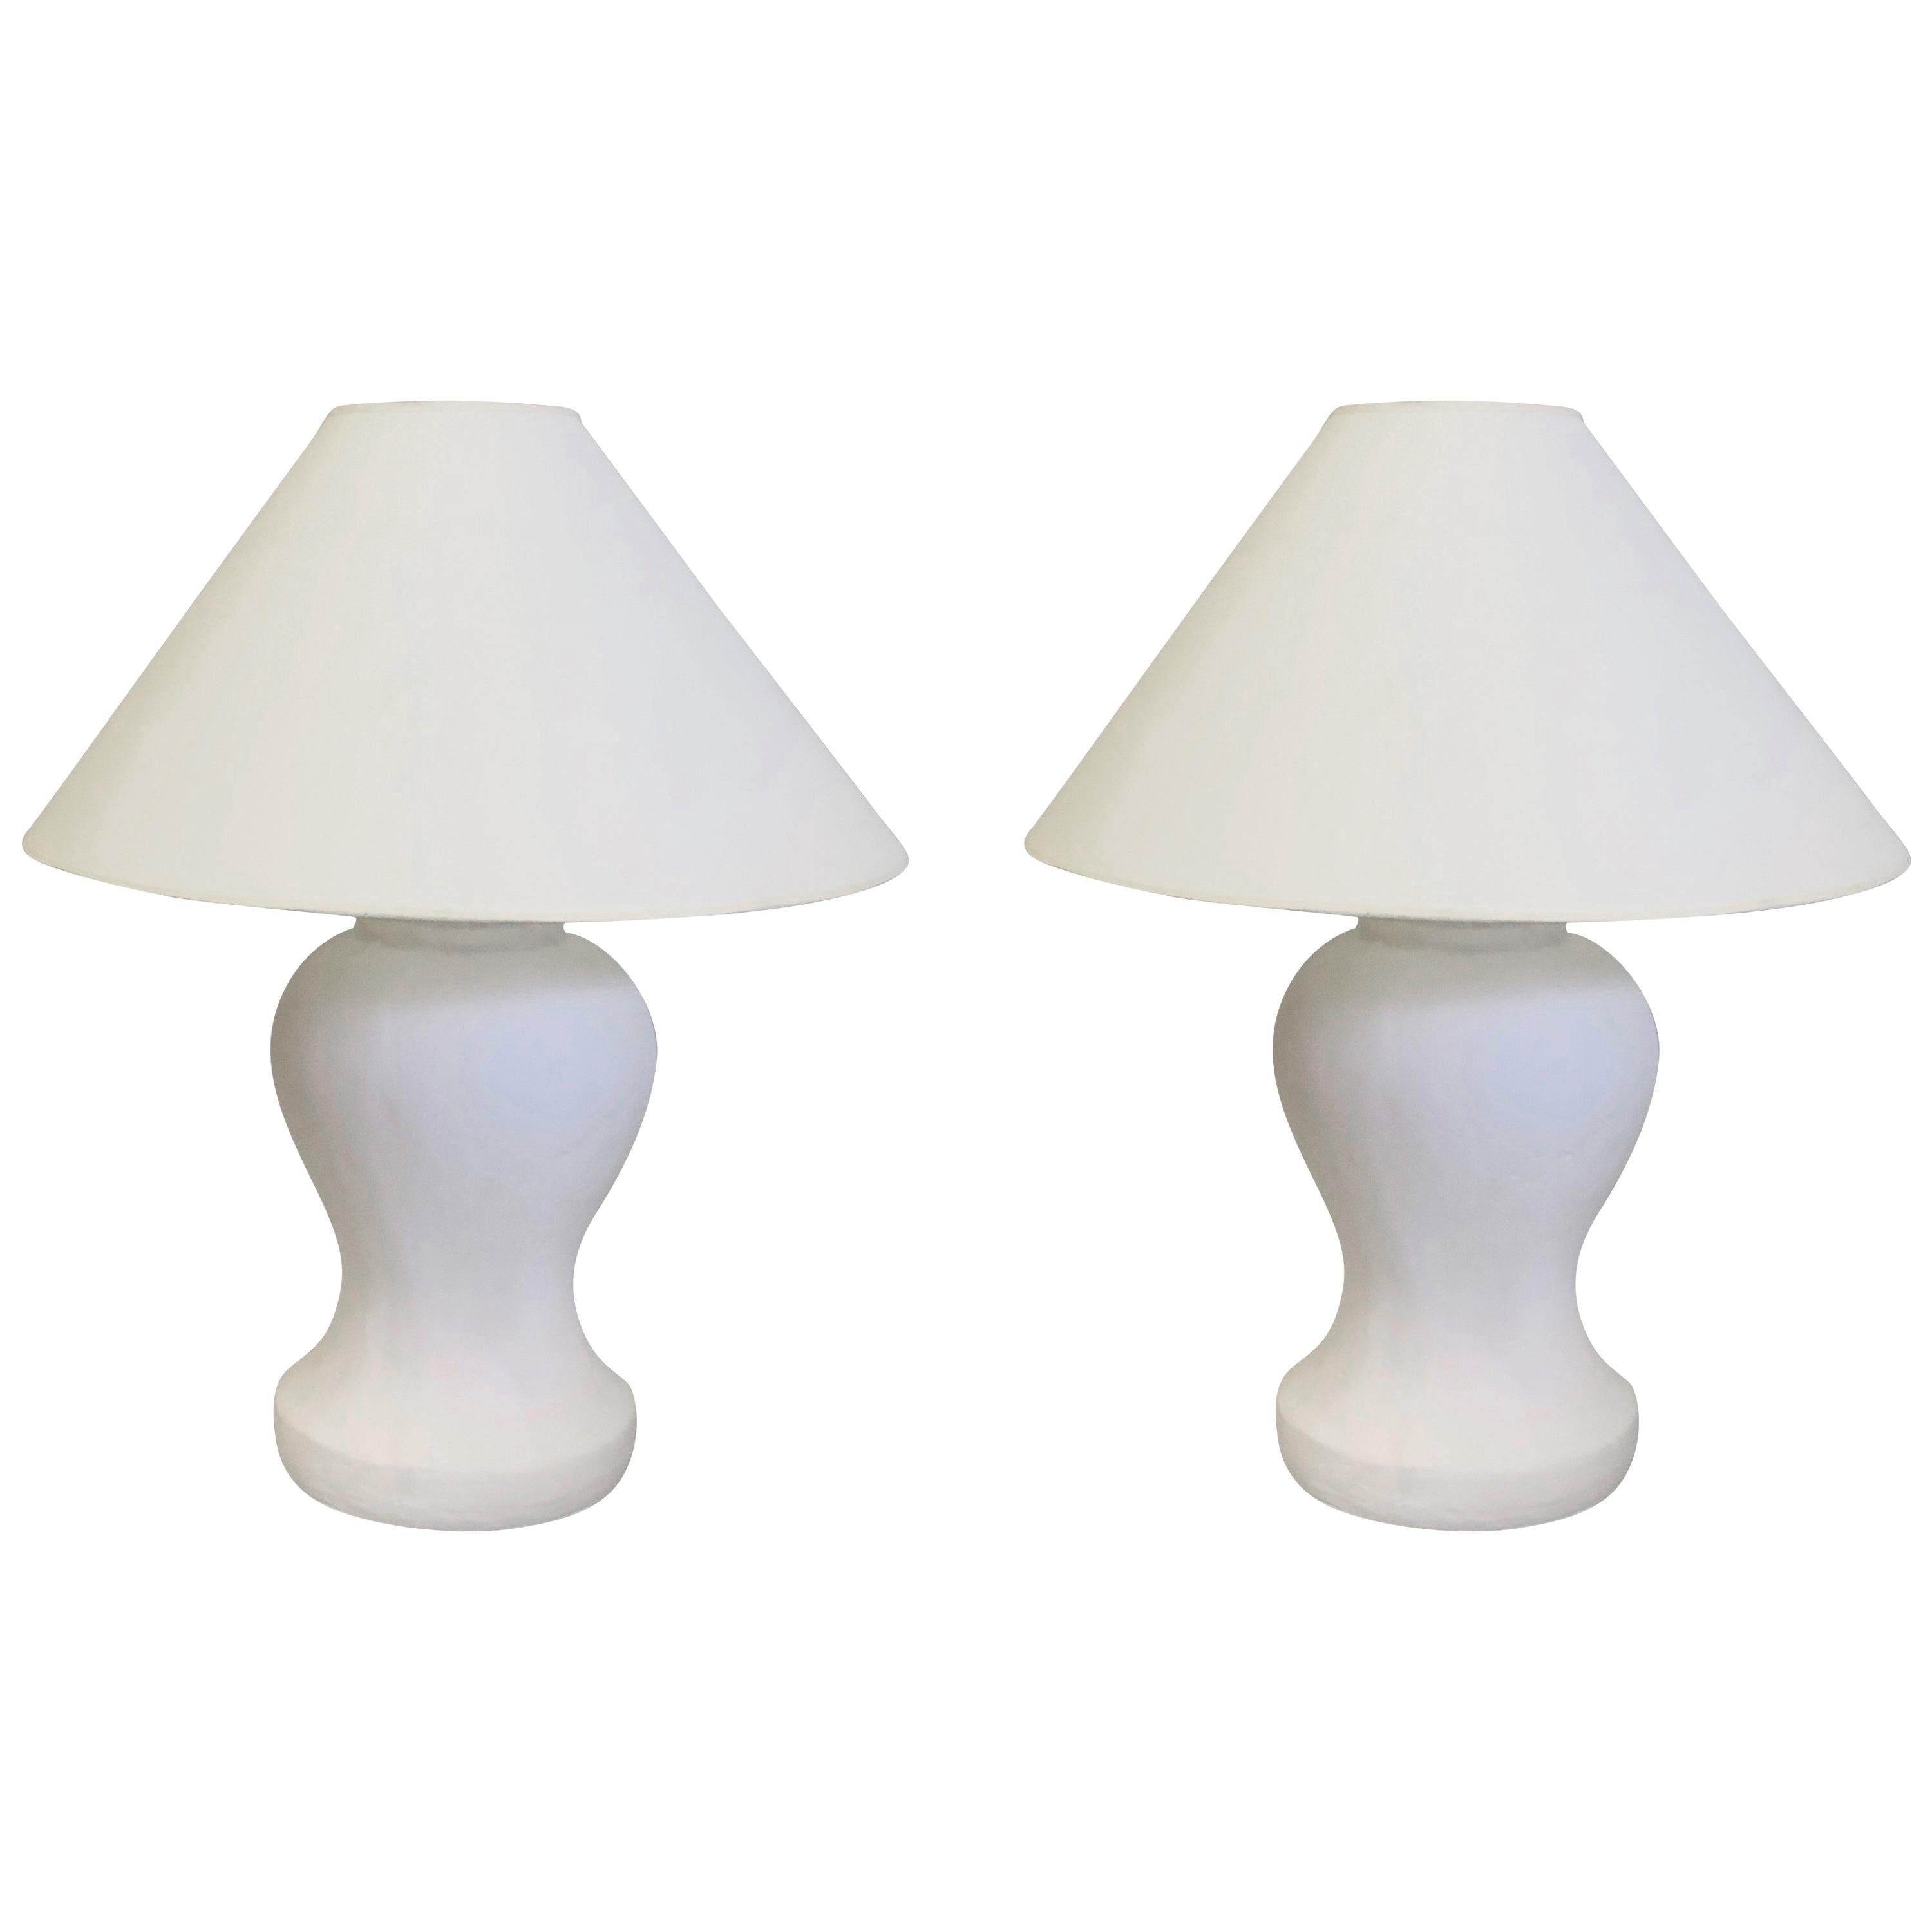 French Plaster Table Lamps Pair from a Model by Giacometti and Jean-Michel Frank